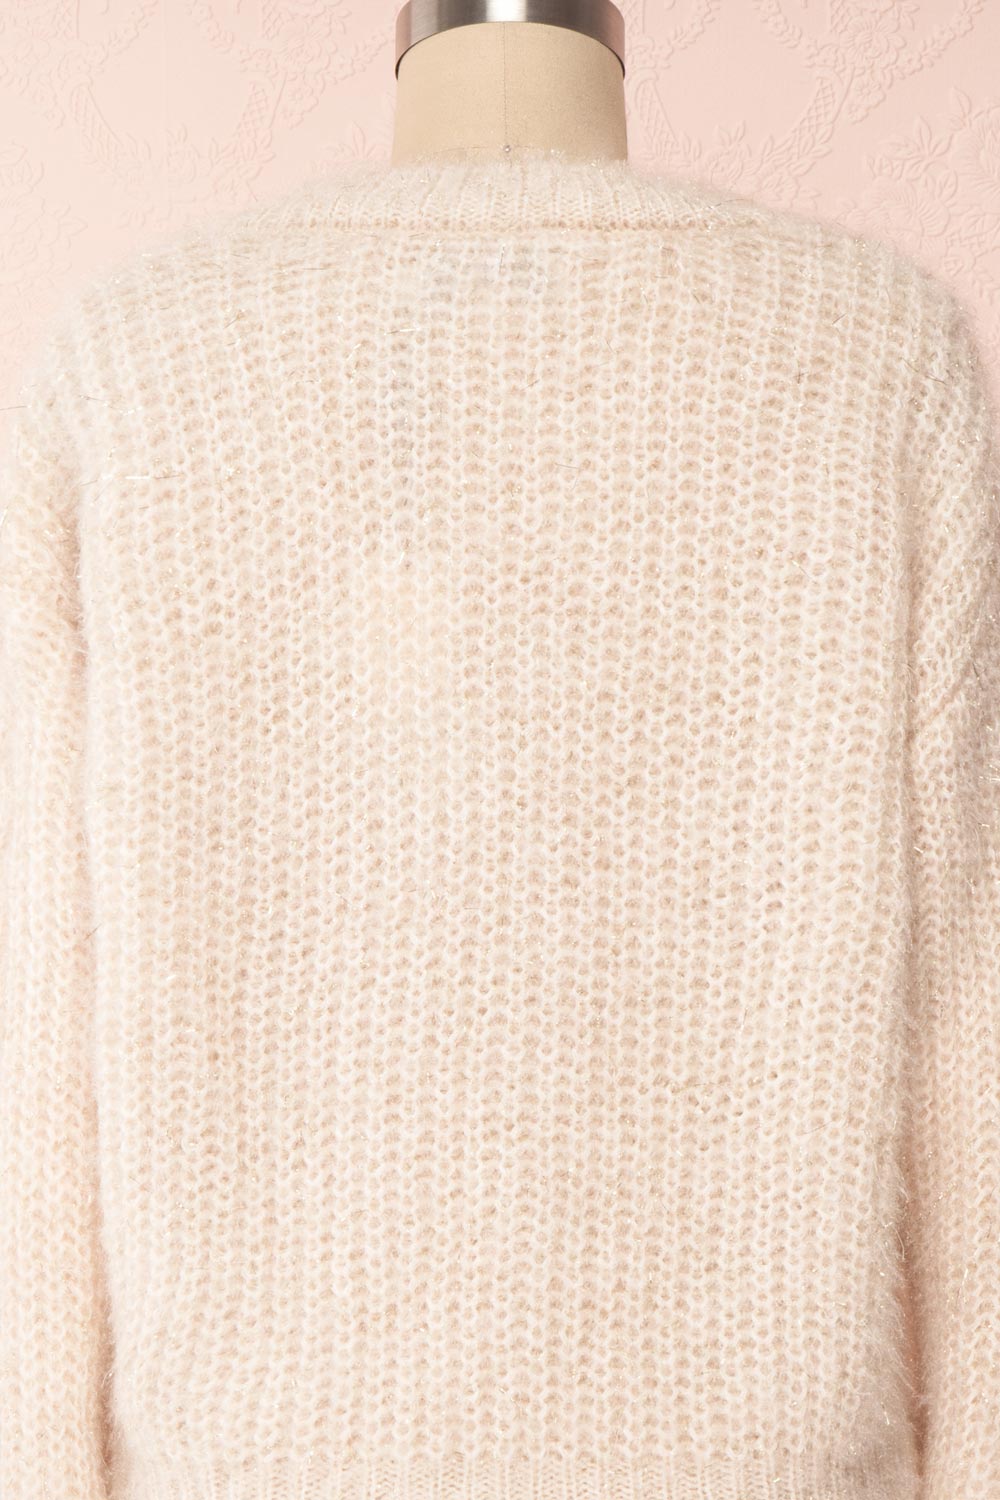 Durong Cream Fuzzy Knit Button-Up Crop Cardigan | BACK CLOSE UP | Boutique 1861